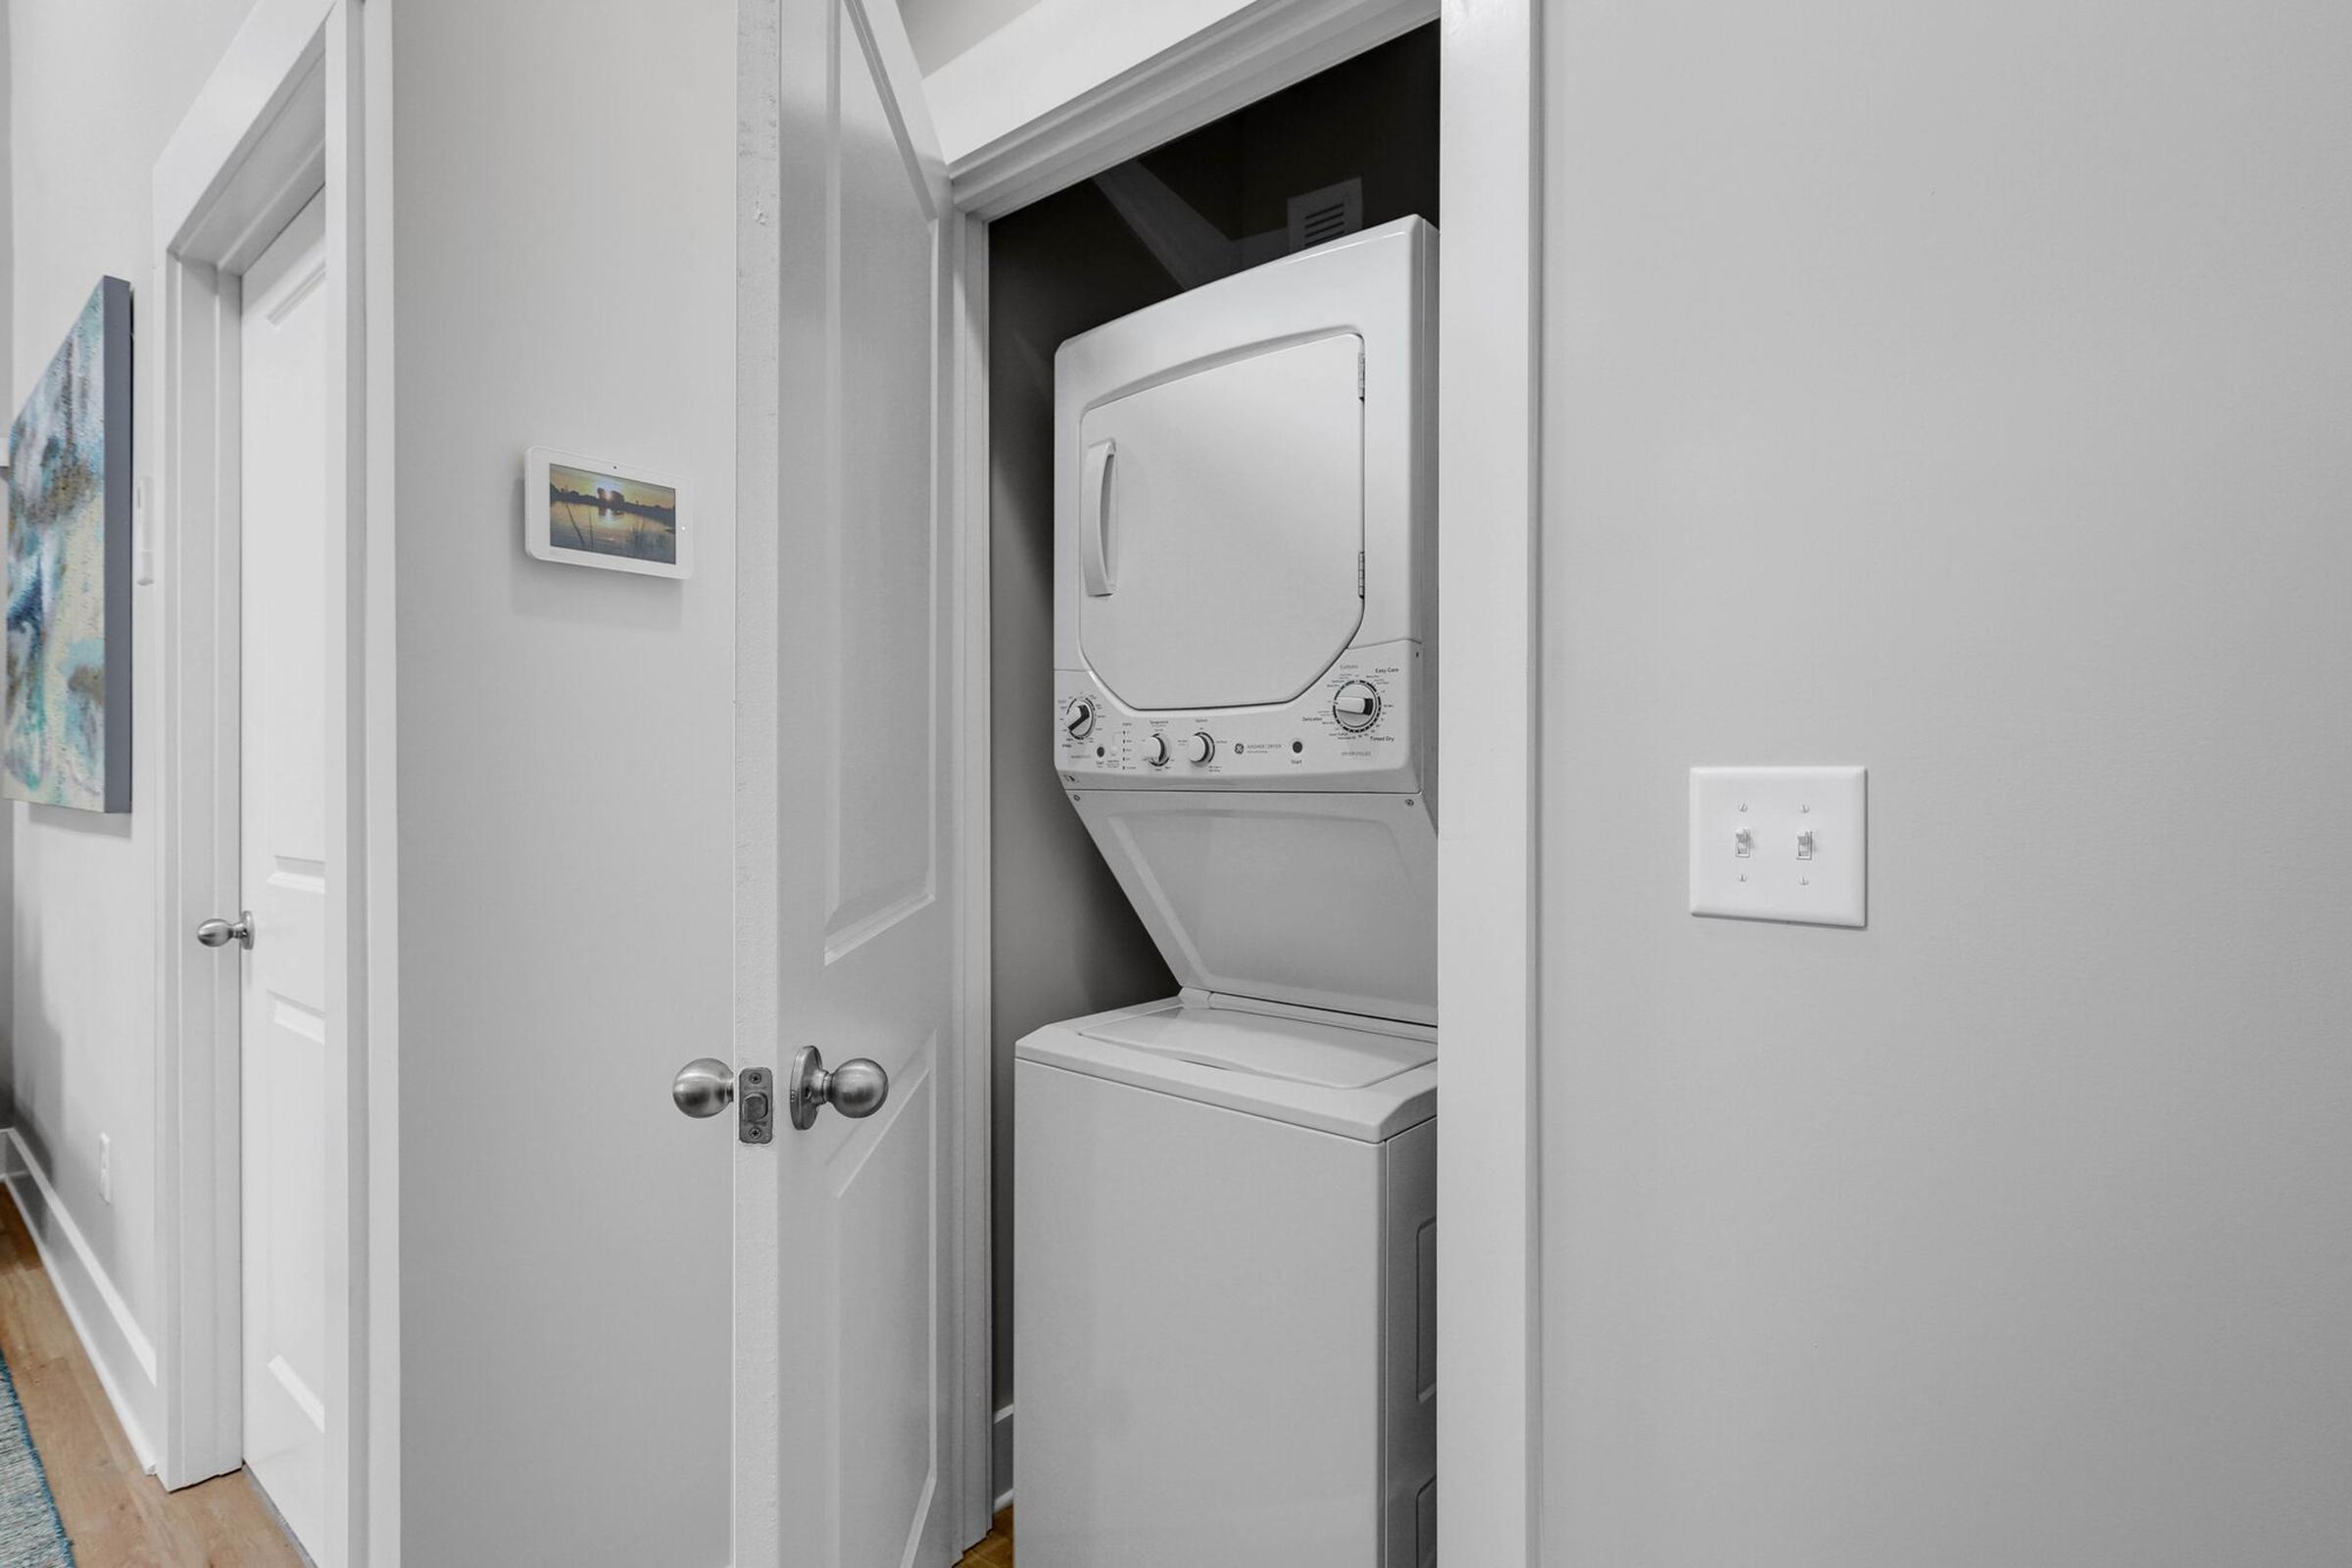 Washer and dryer units in home at The Townhomes at Beau Rivage in Wilmington, North Carolina.